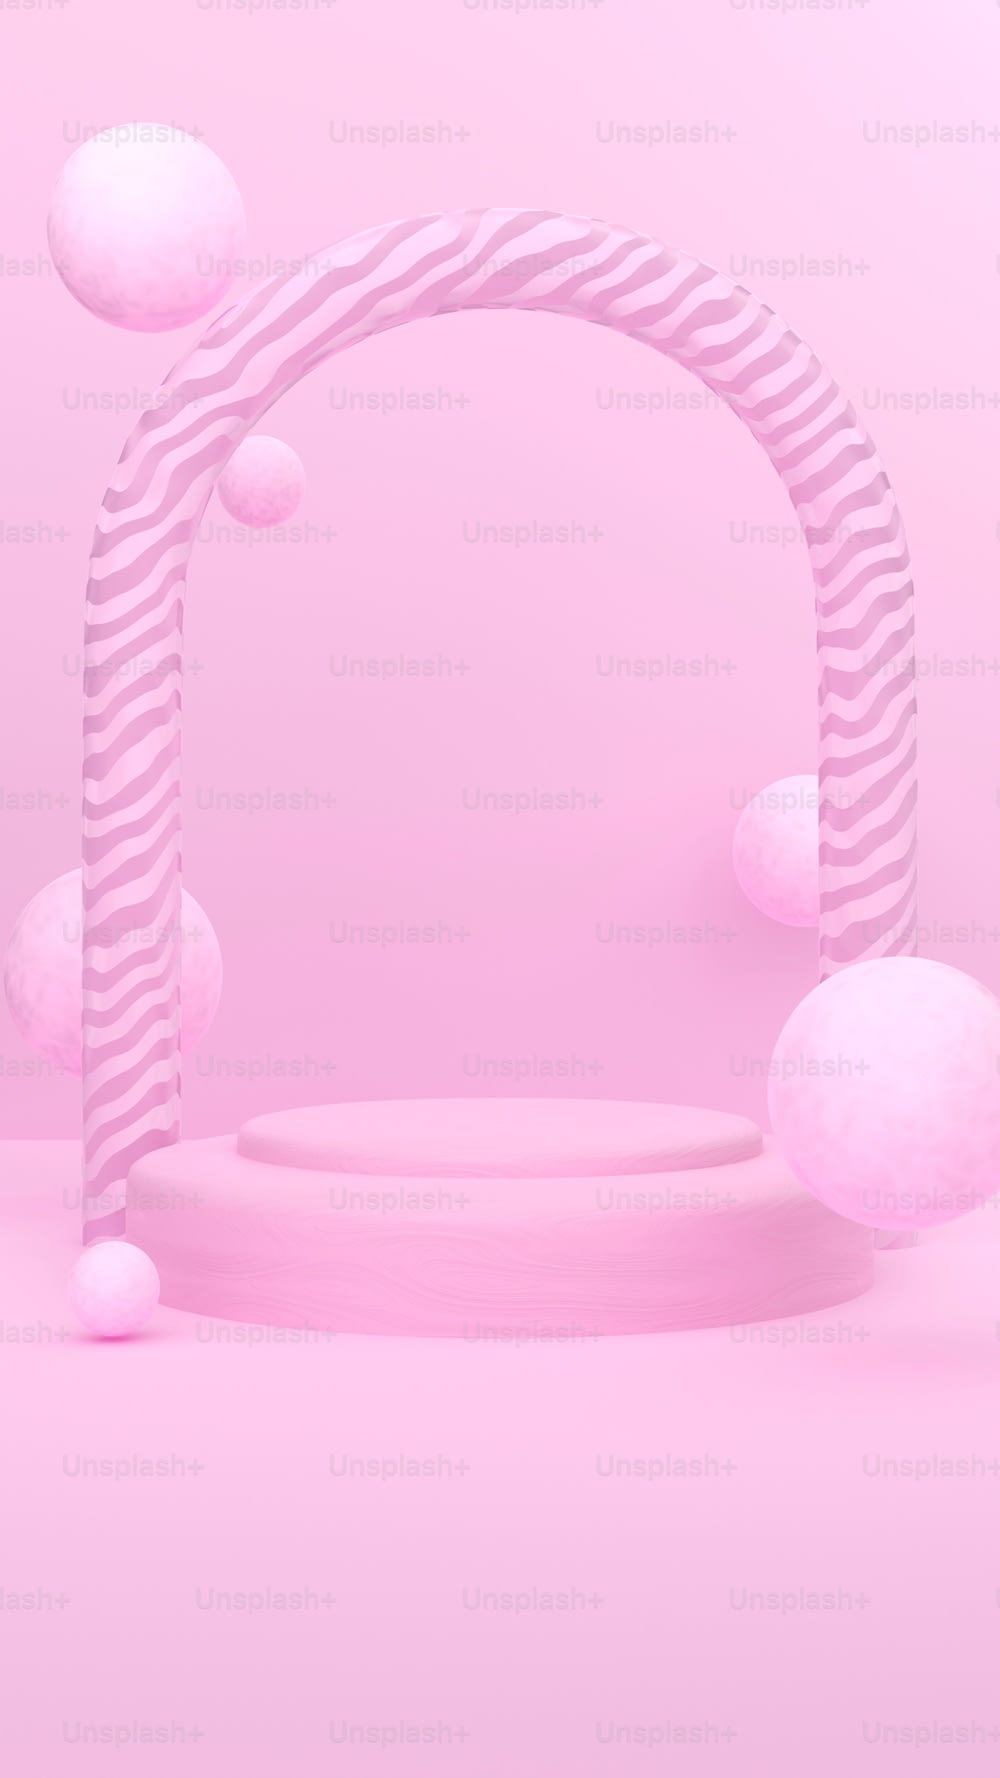 a pink background with a circular object in the middle